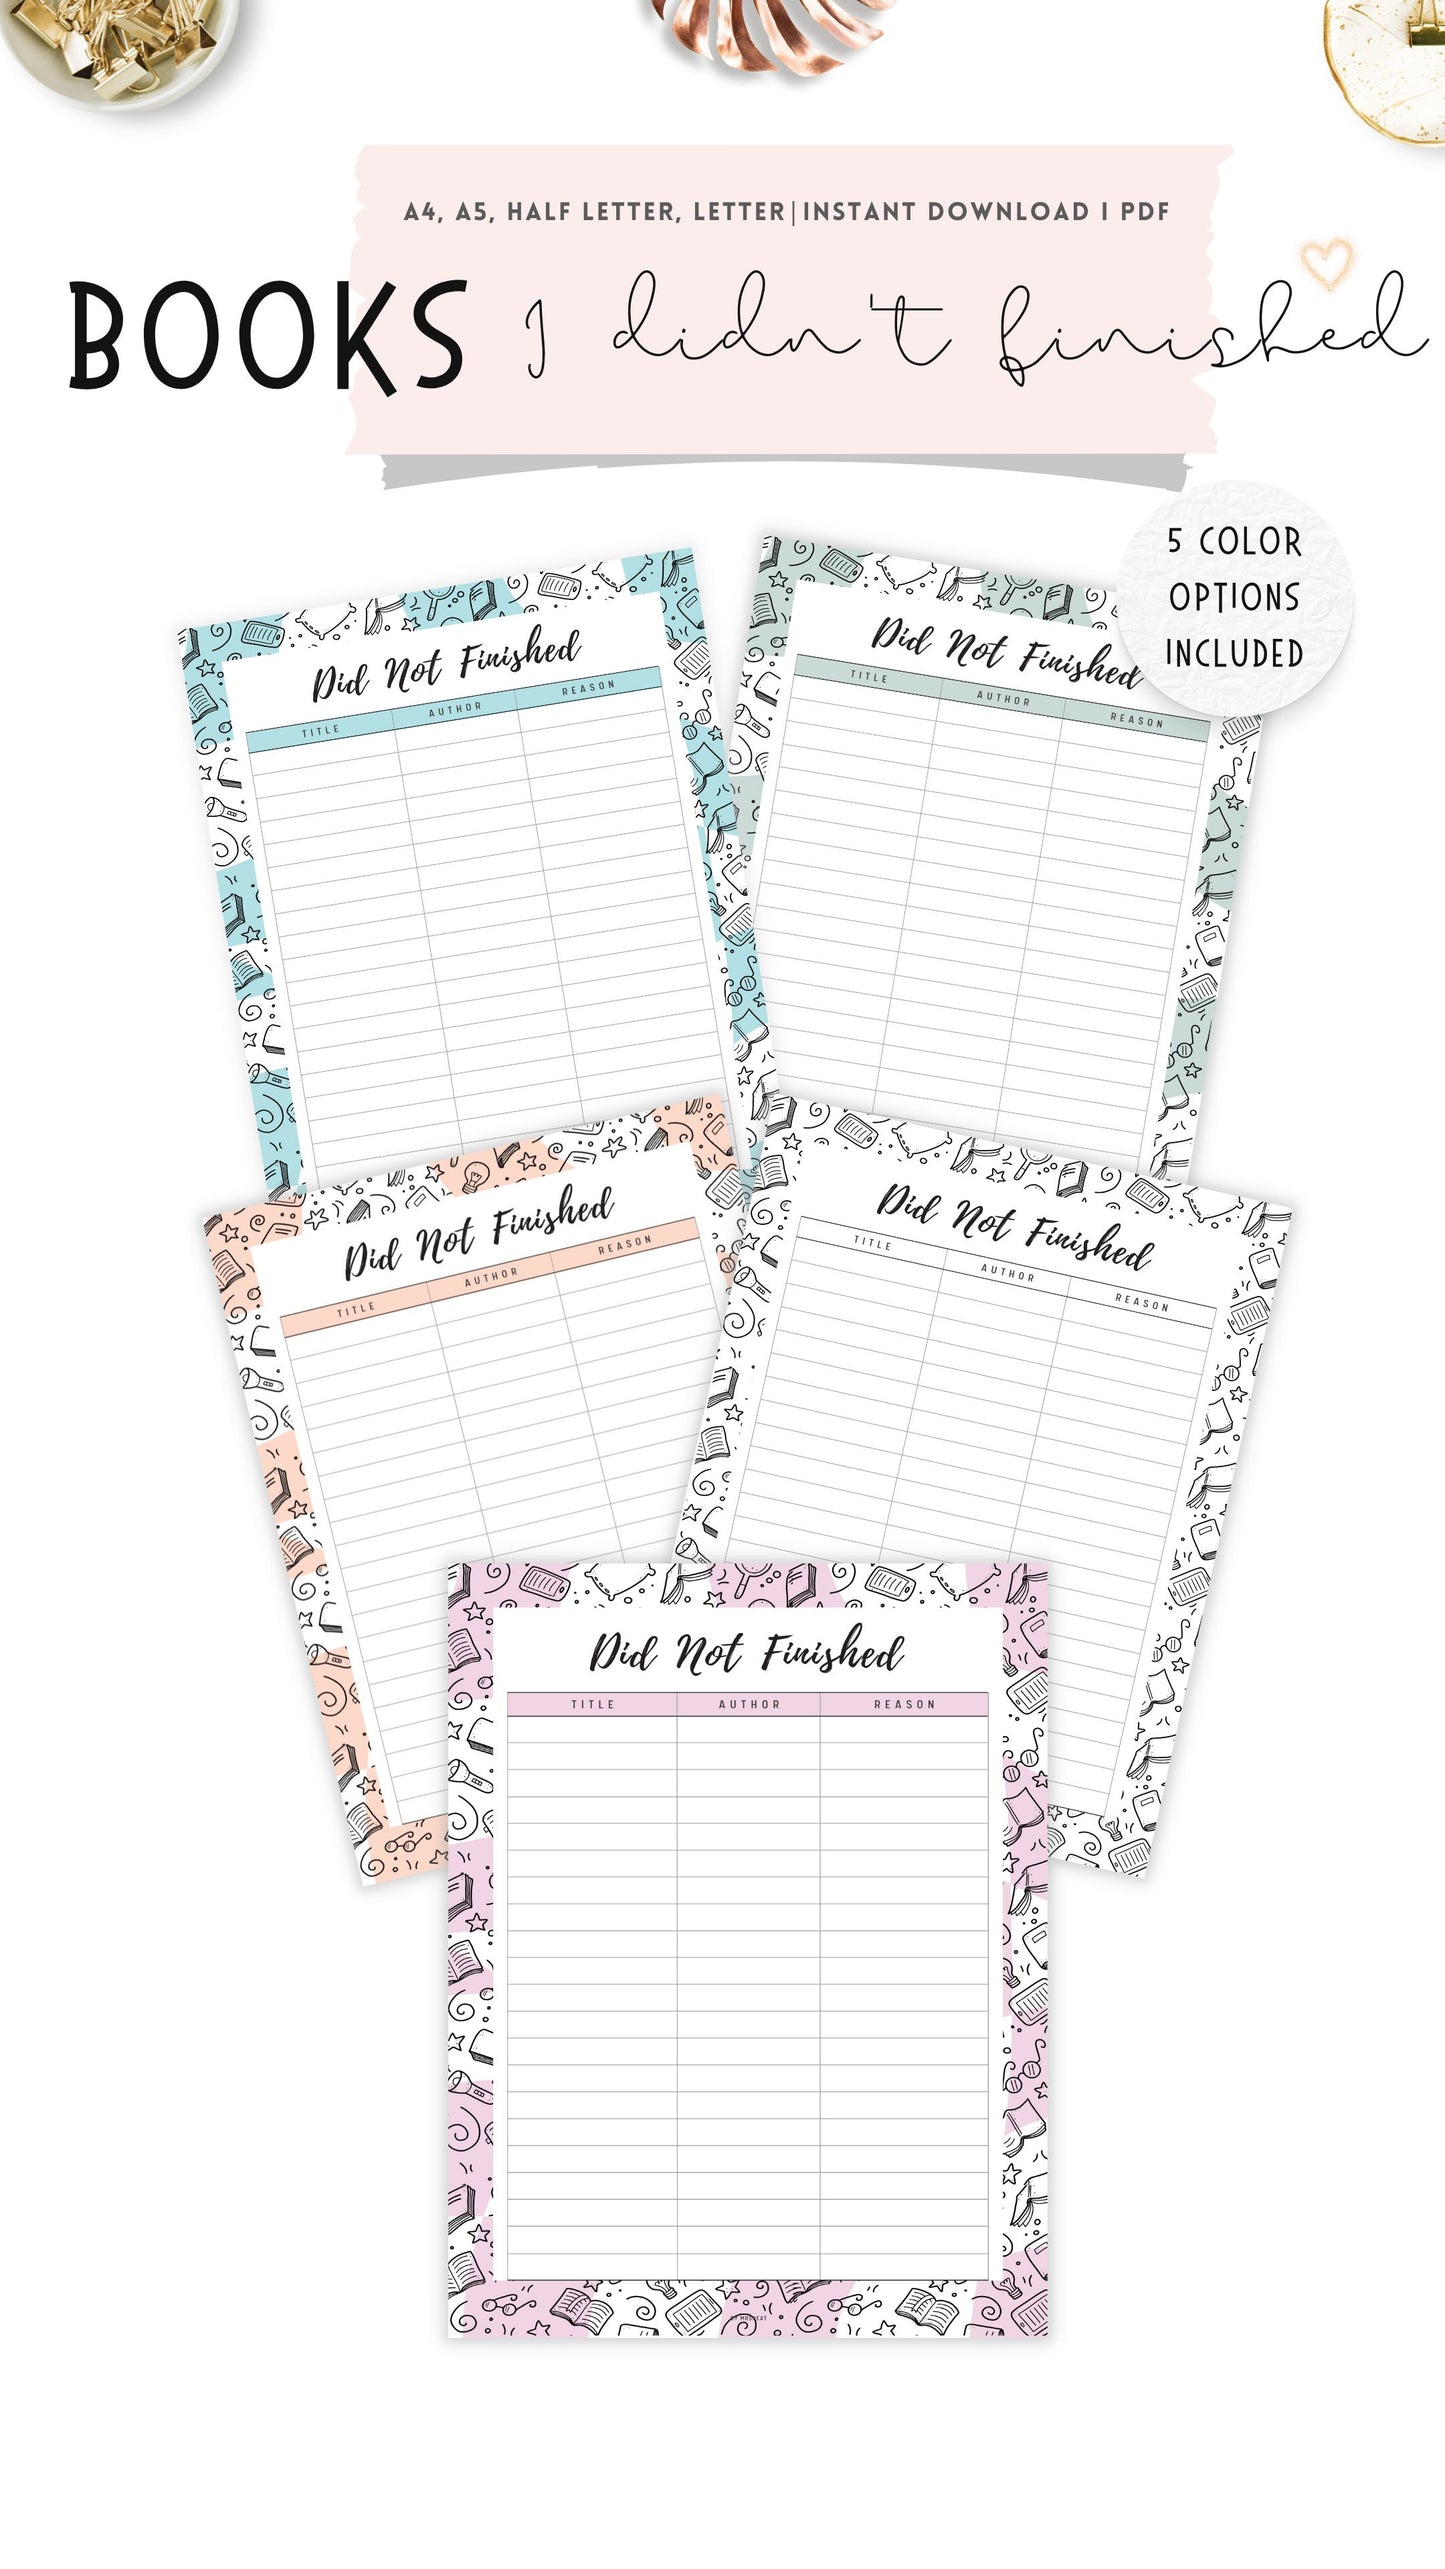 Books I Did Not Finished Template Printable, 5 colors : Blue, Neutral, Green, Pink, Peach, 4 sizes : A4, A5, Letter, Half Letter, Digital Planner